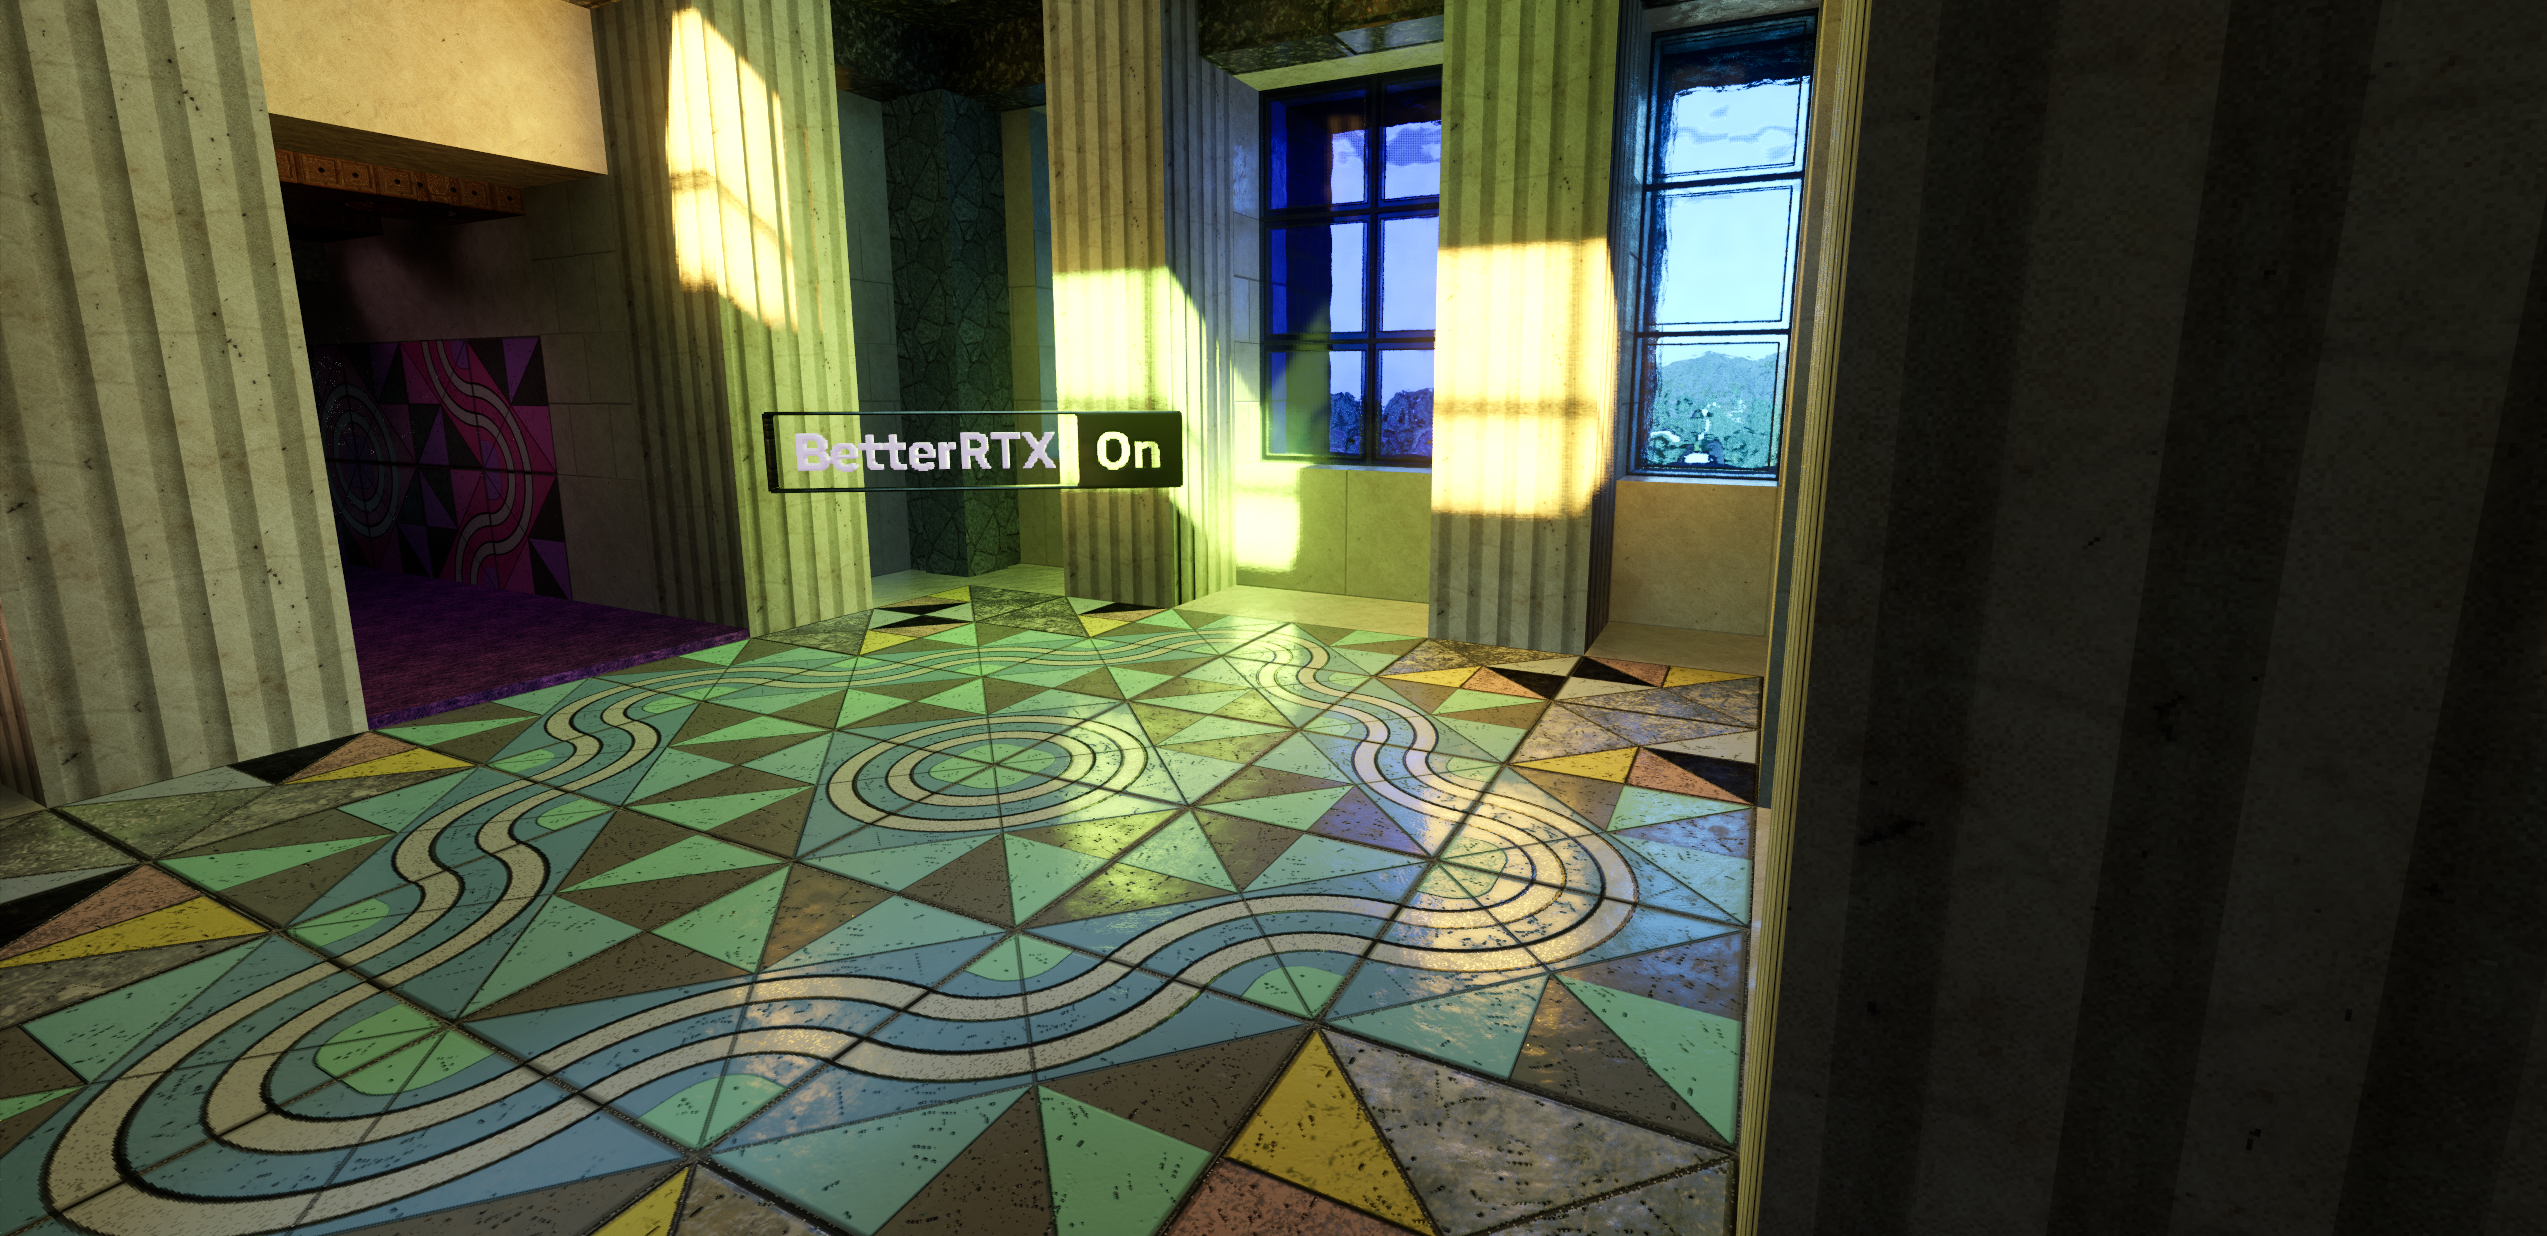 JG RTX with BetterRTX shader